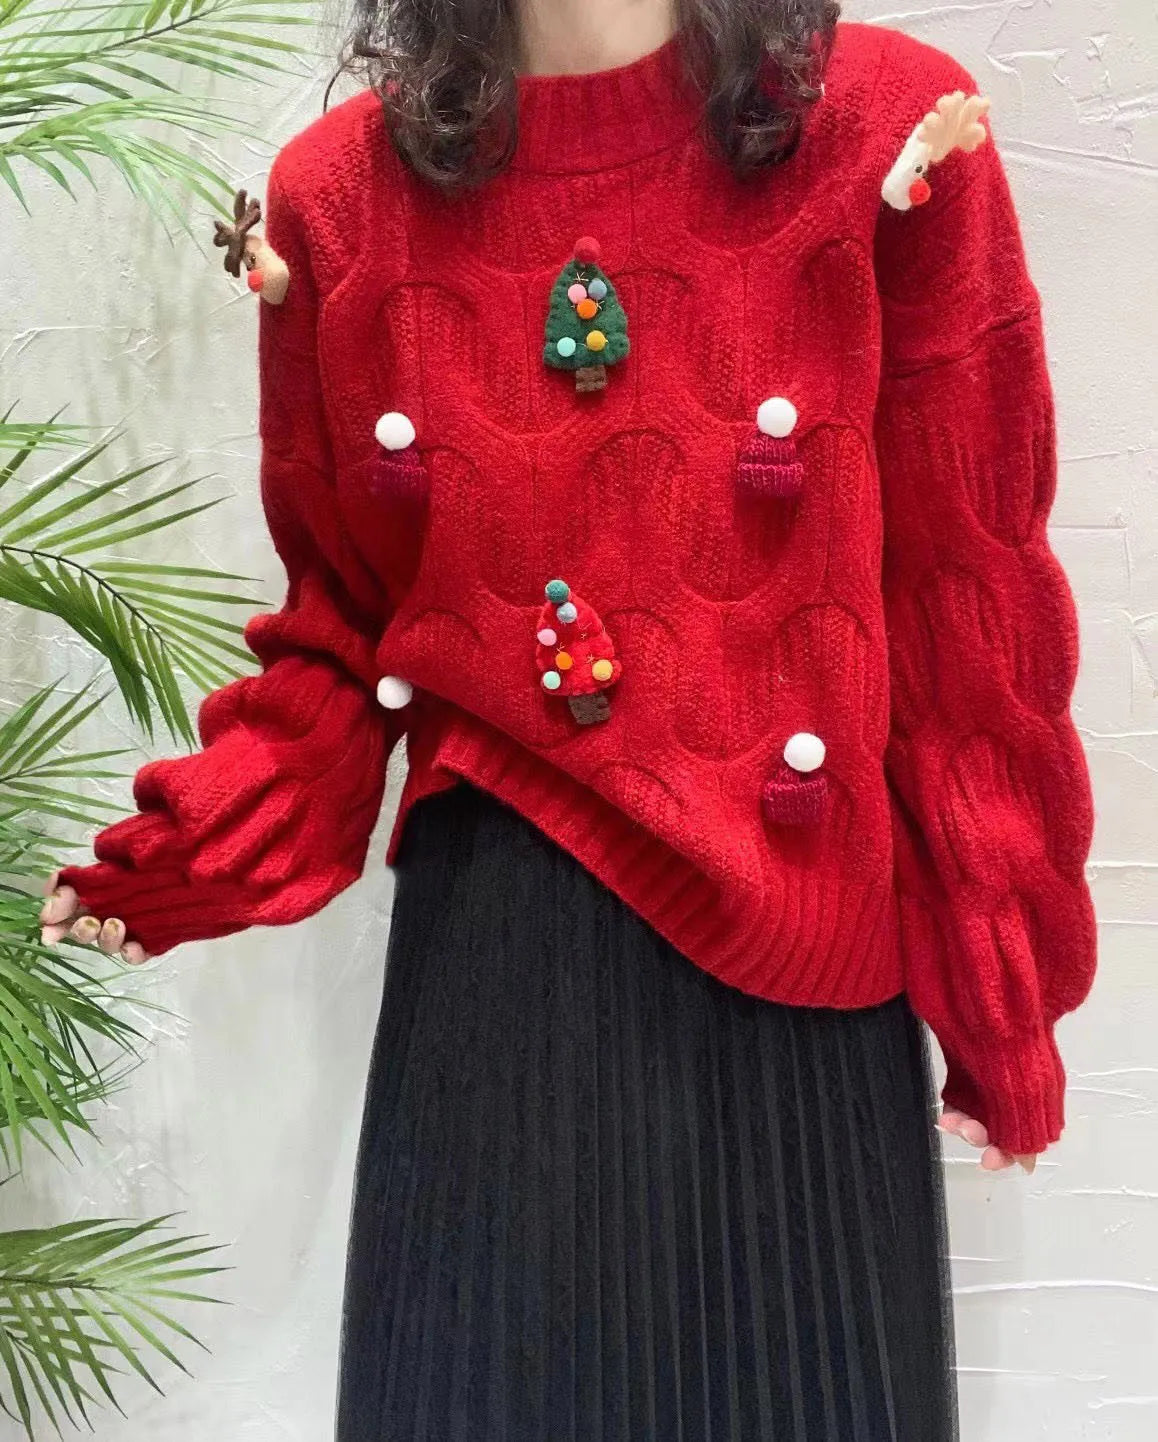 Red Christmas Sweater New Autumn/Winter Women's Unique Colorful Decal Atmosphere Feel Pullover Fashion Versatile Loose Top New Year voguable